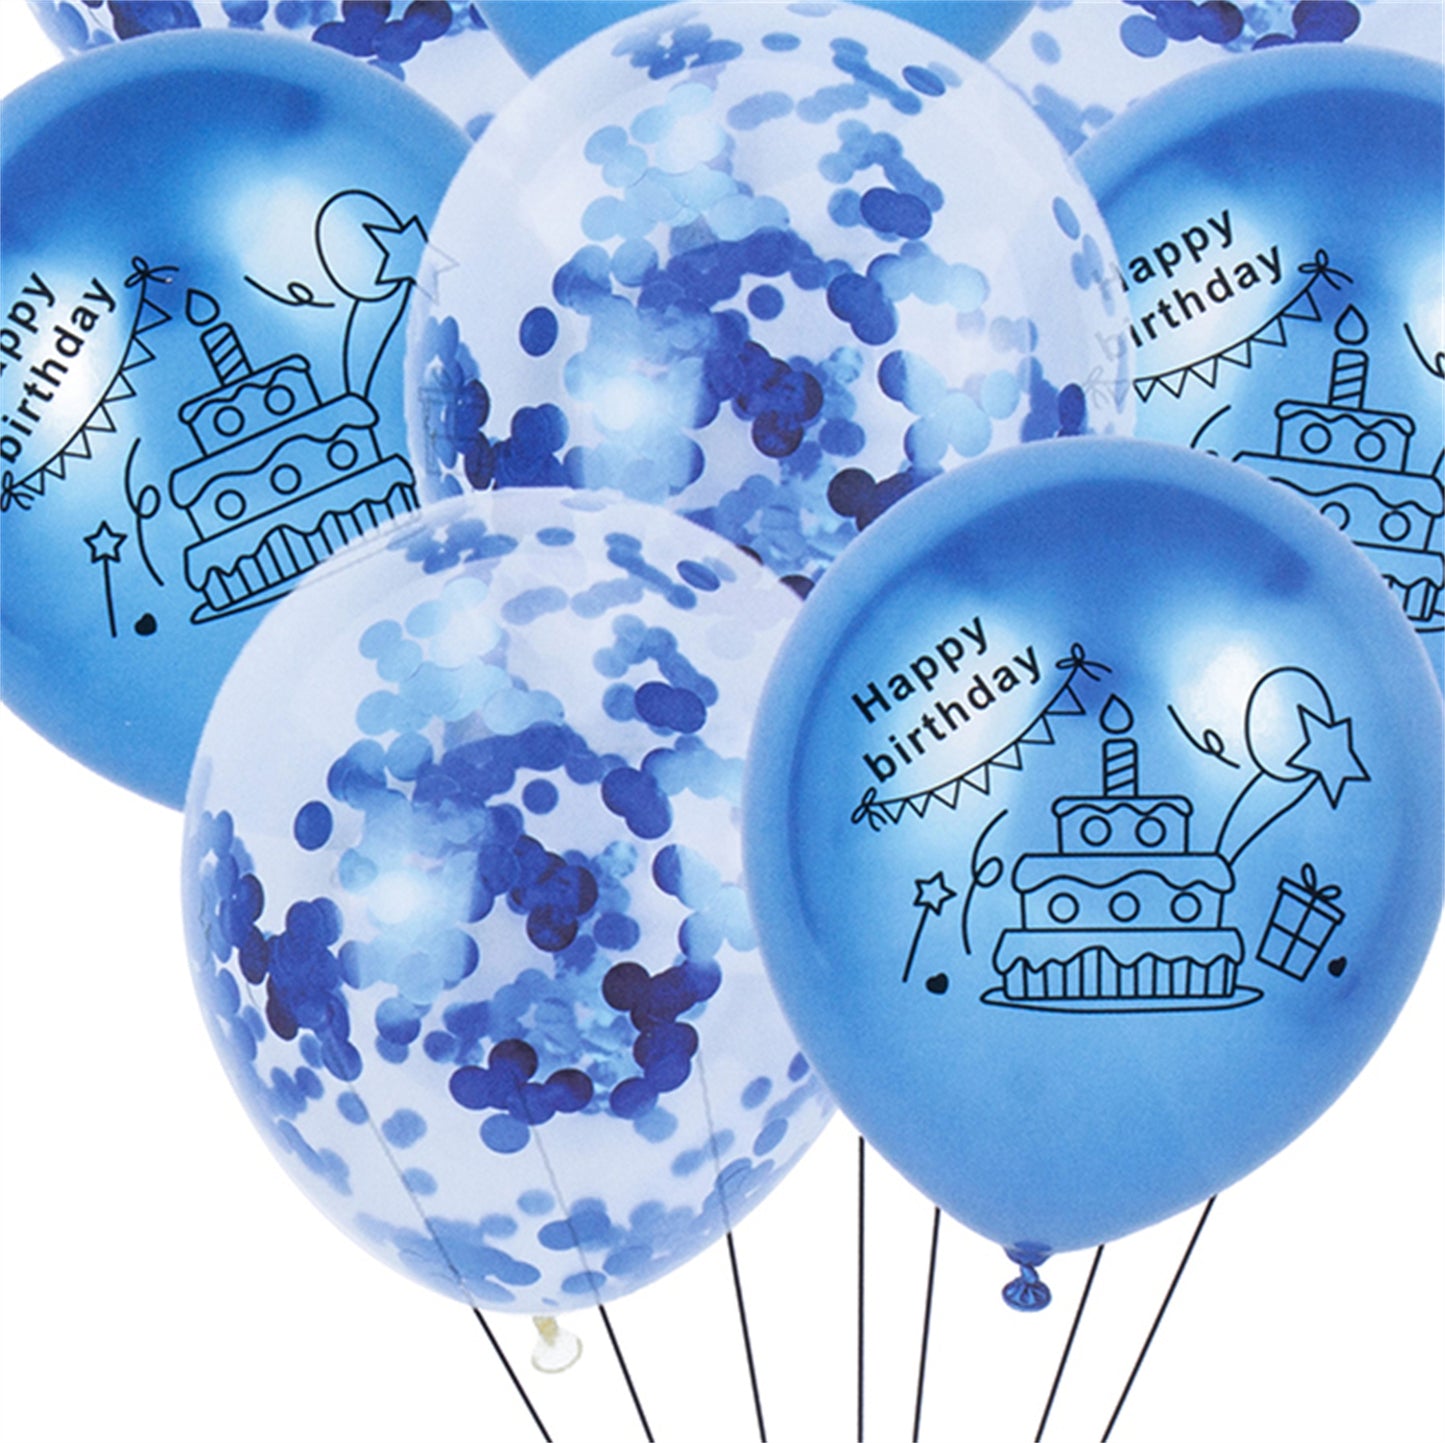 Party balloon boy decorations and girl decorations